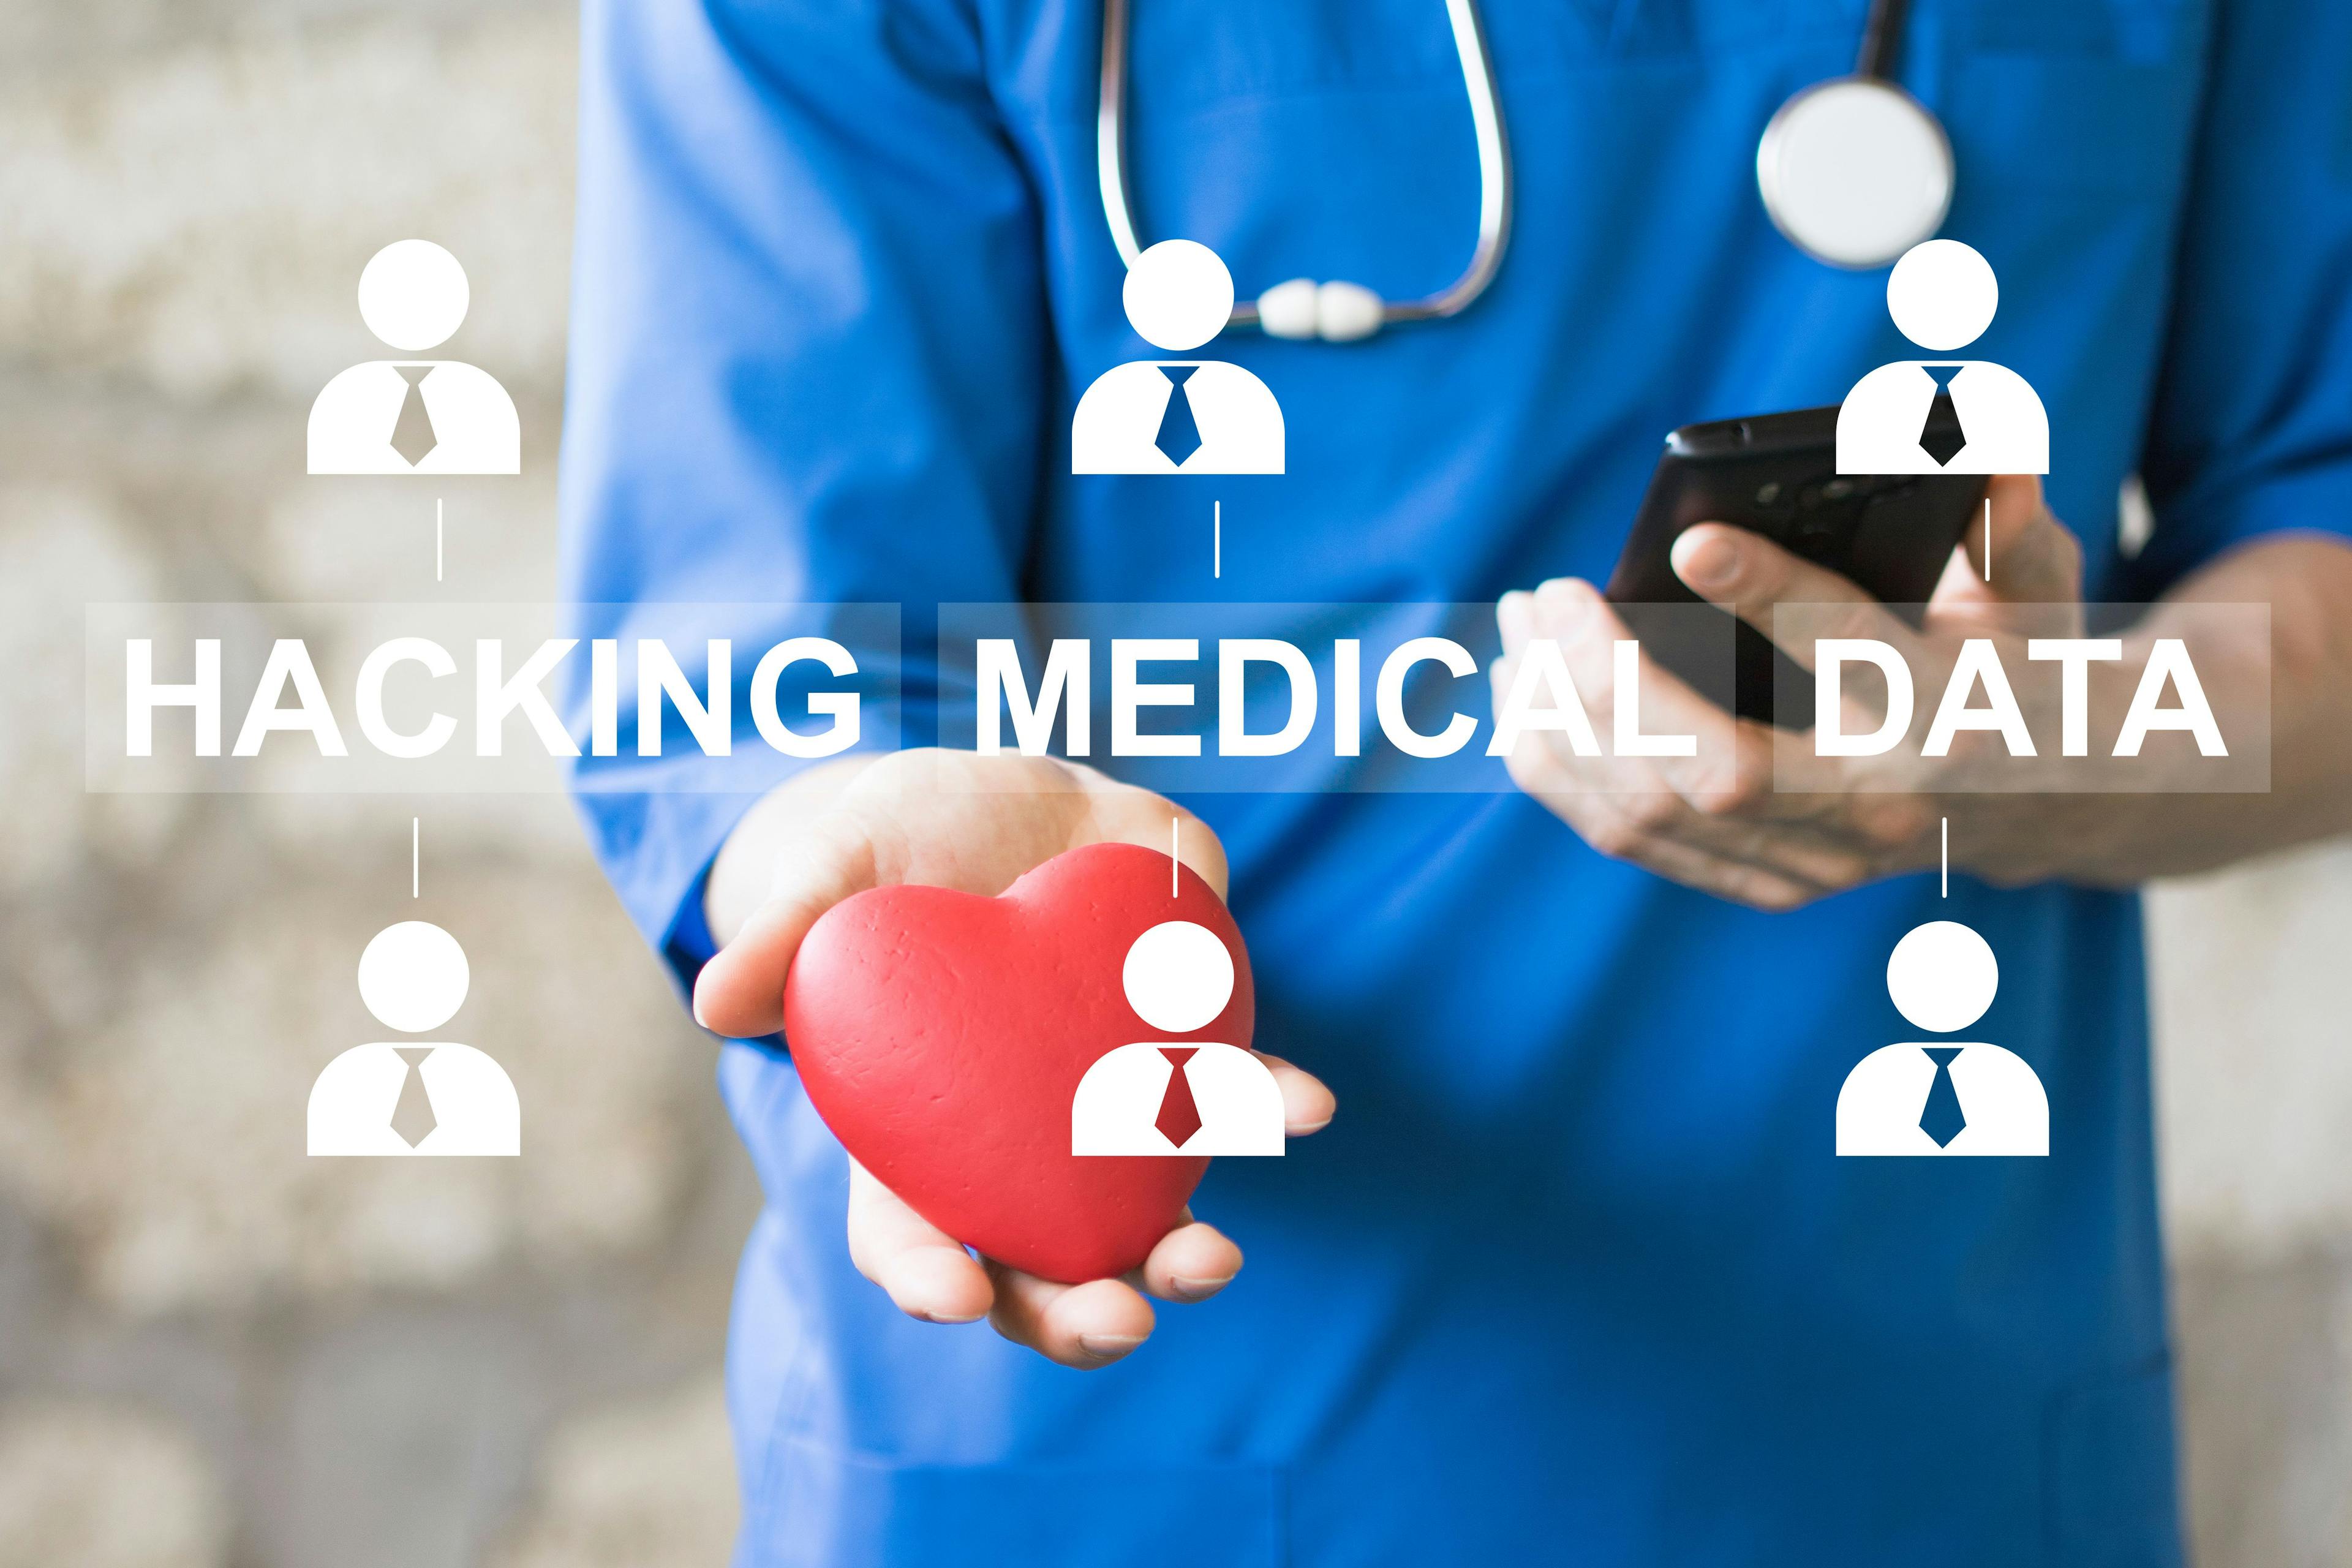 Hacking medical data text against physician background ©maxsim-stock.adobe.com